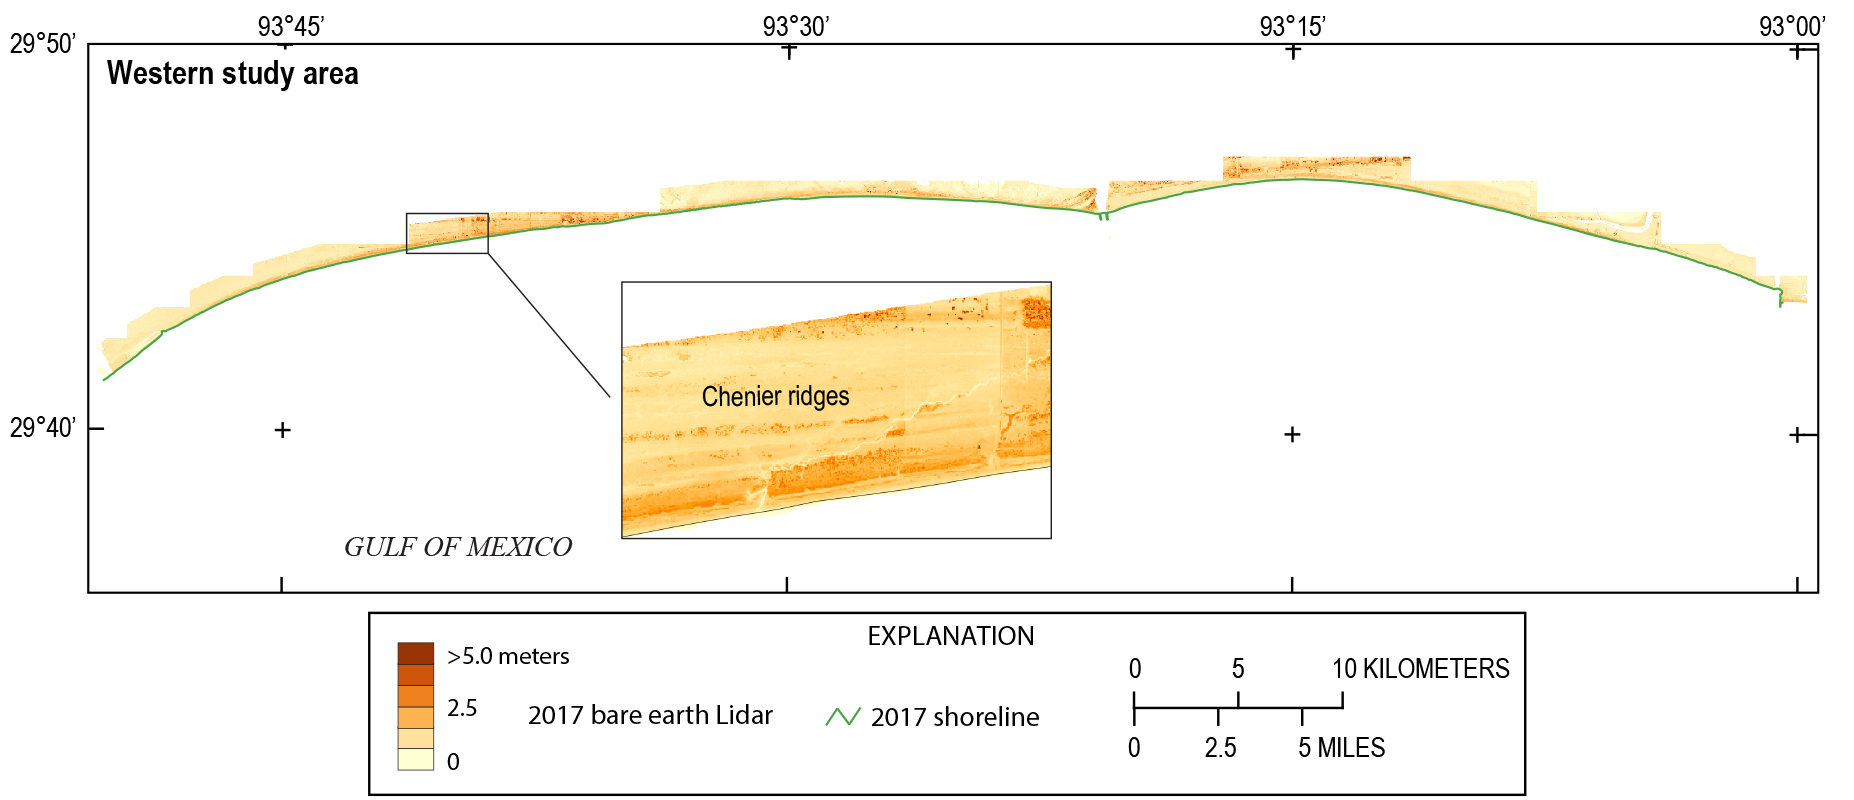 Figure 19. DEM shows a “Gulf of Mexico” label. Inset image has a label for “Chenier
                     ridges.”